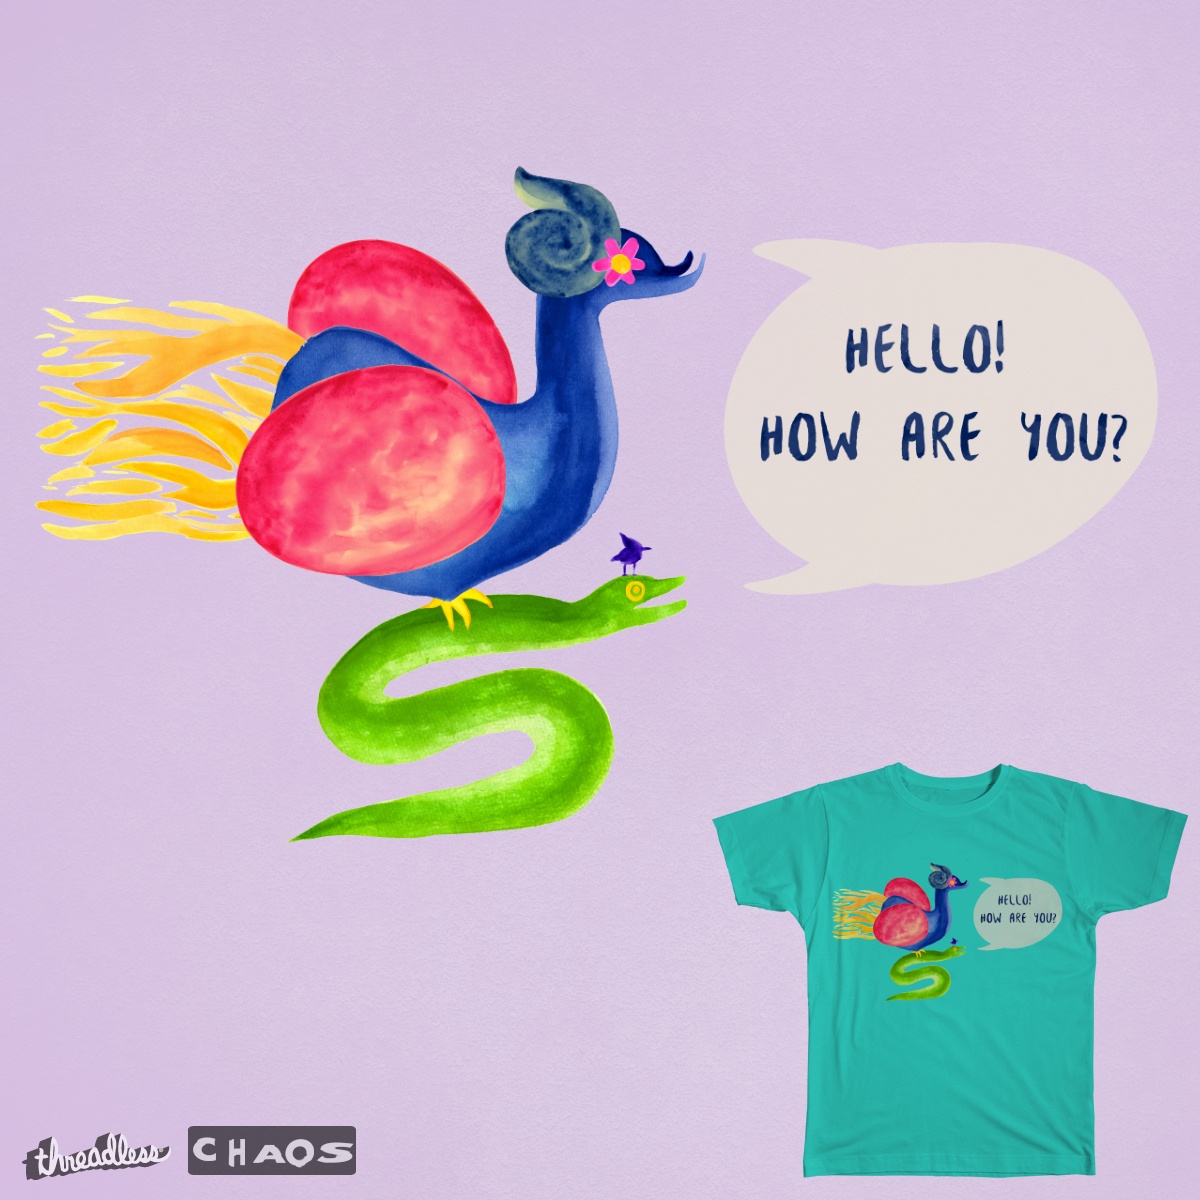 Hello! How are you?, a cool t-shirt design